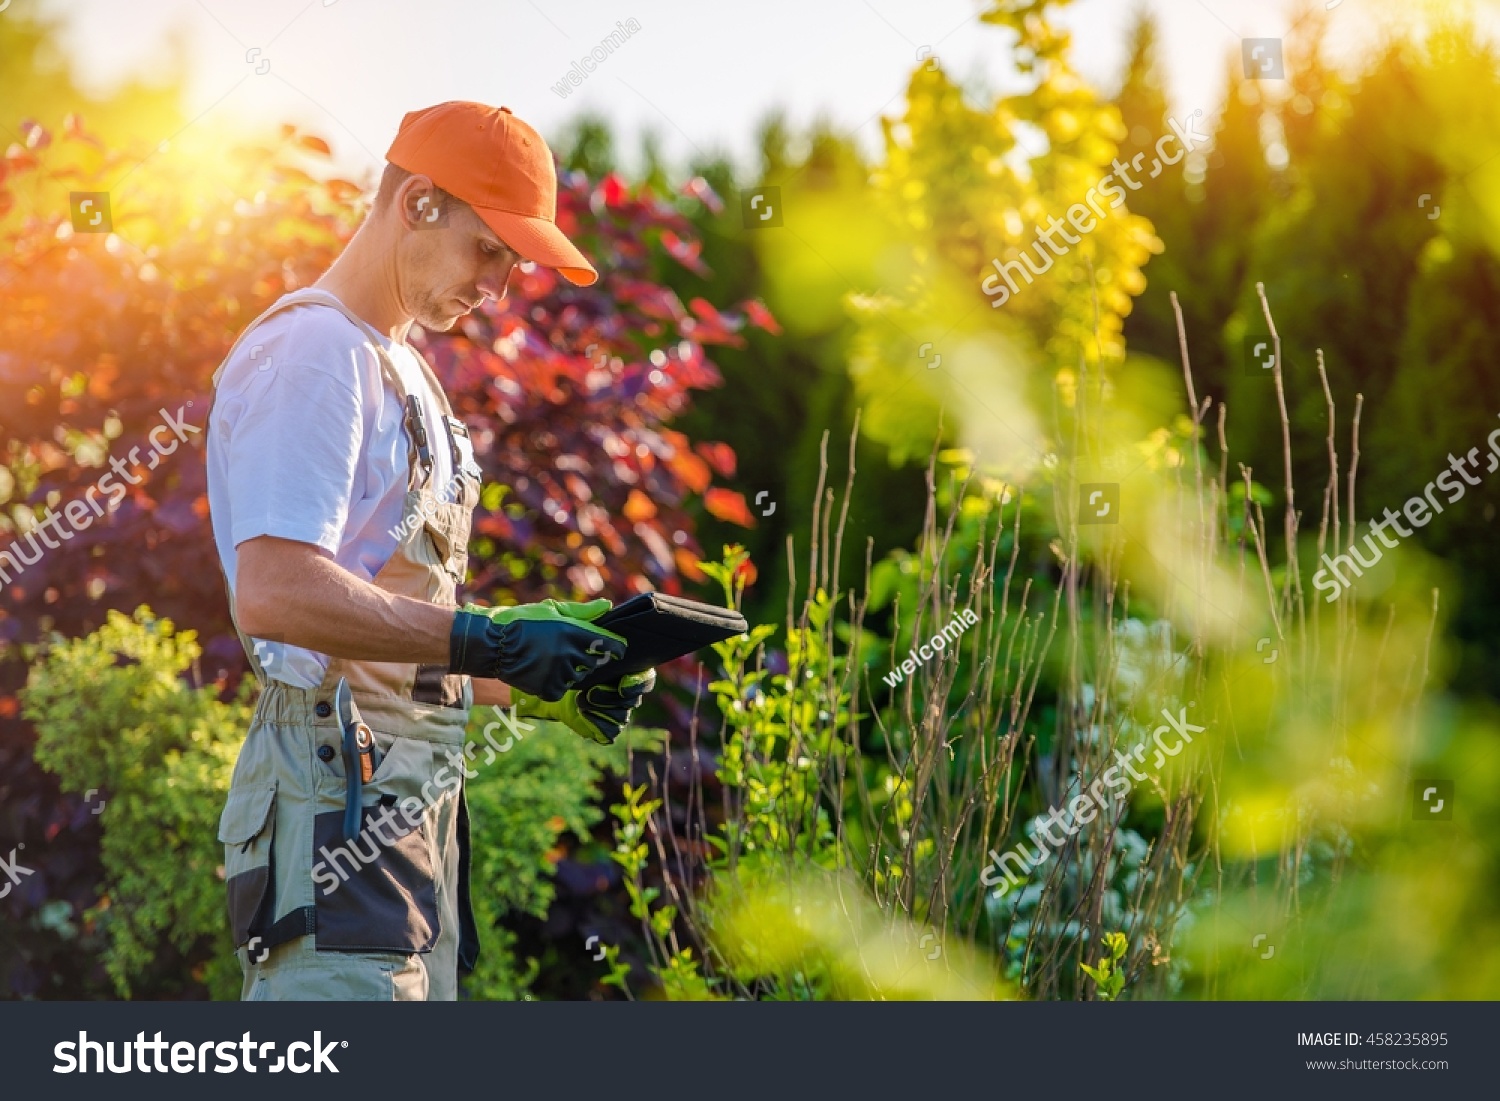 Garden Design with Tablet Device. Professional Gardener with His Tablet Computer. #458235895